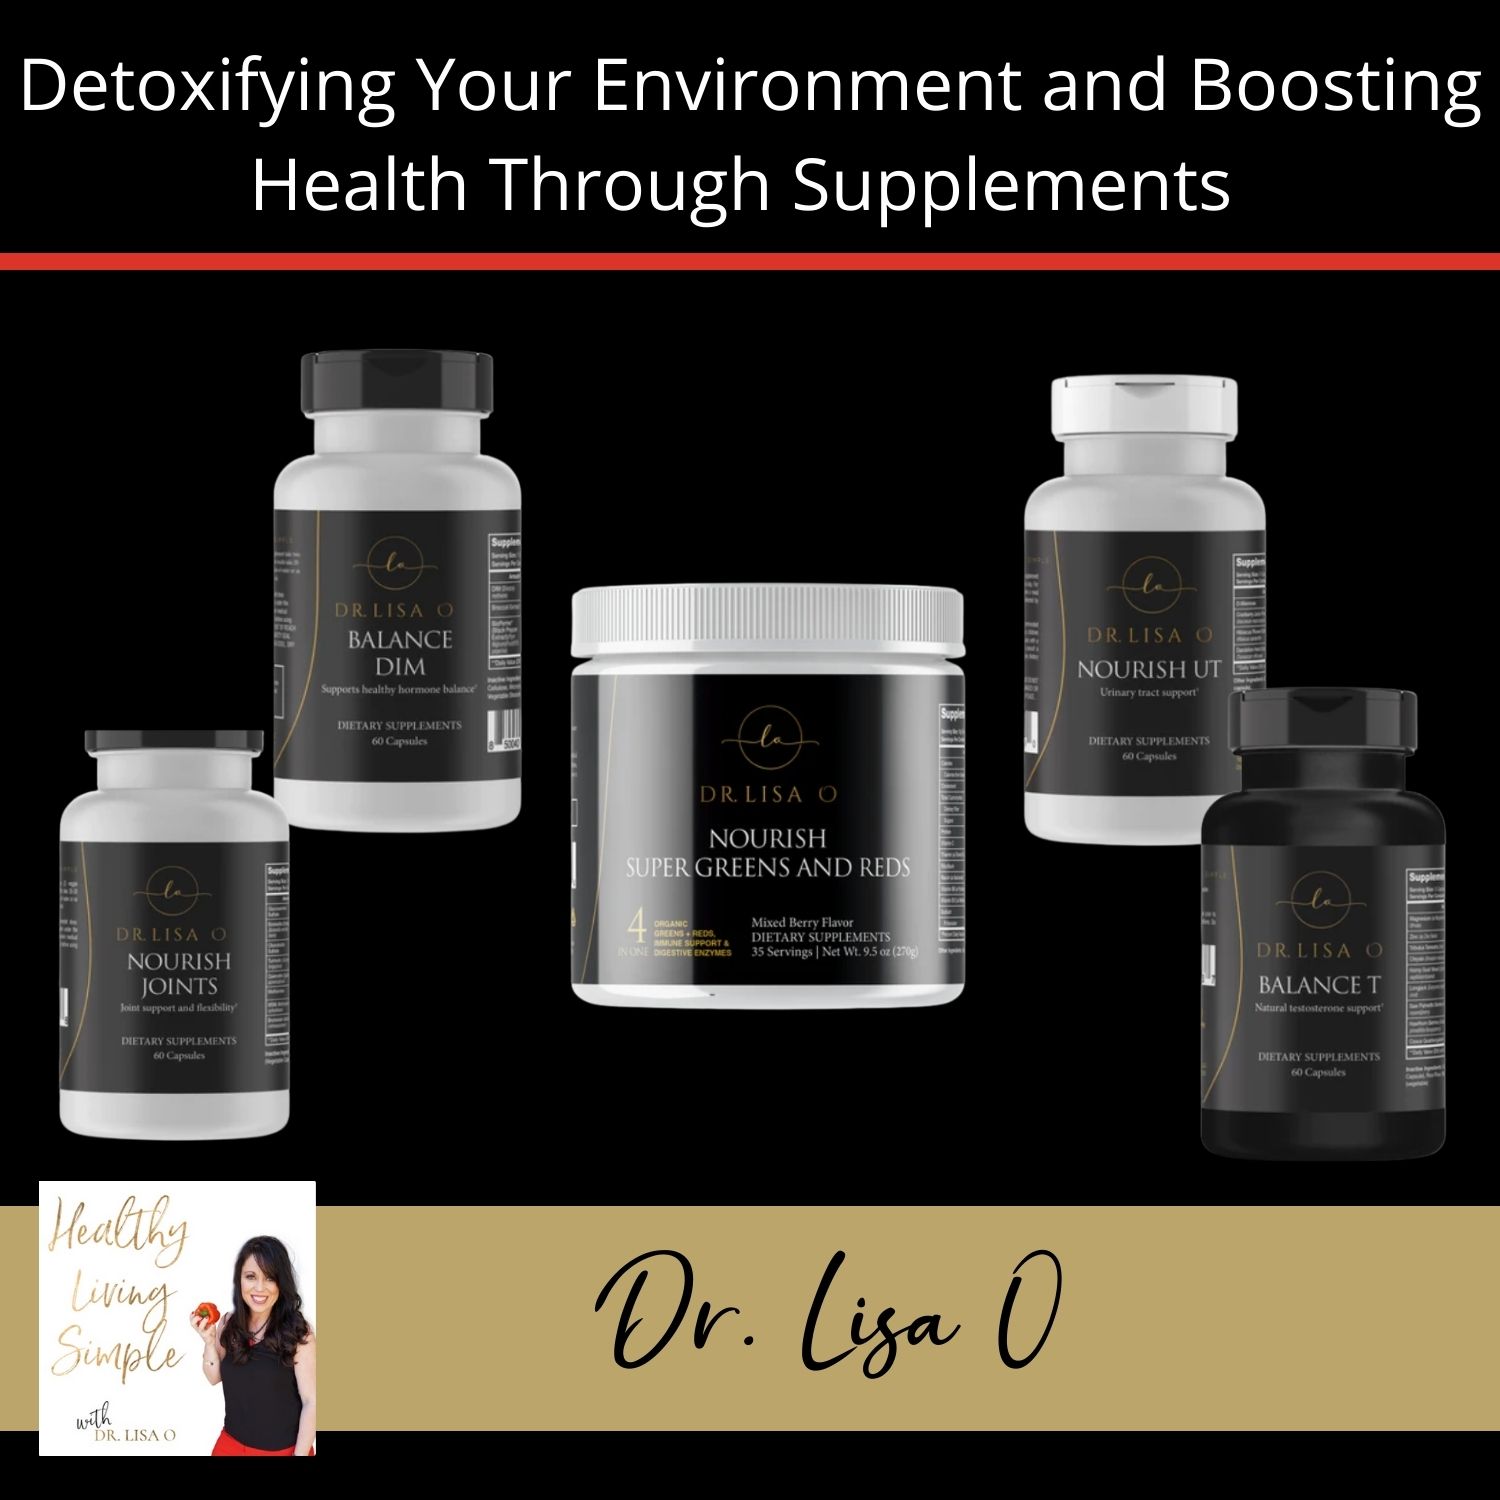 99 Detoxifying Your Environment and Boosting Health Through Supplements